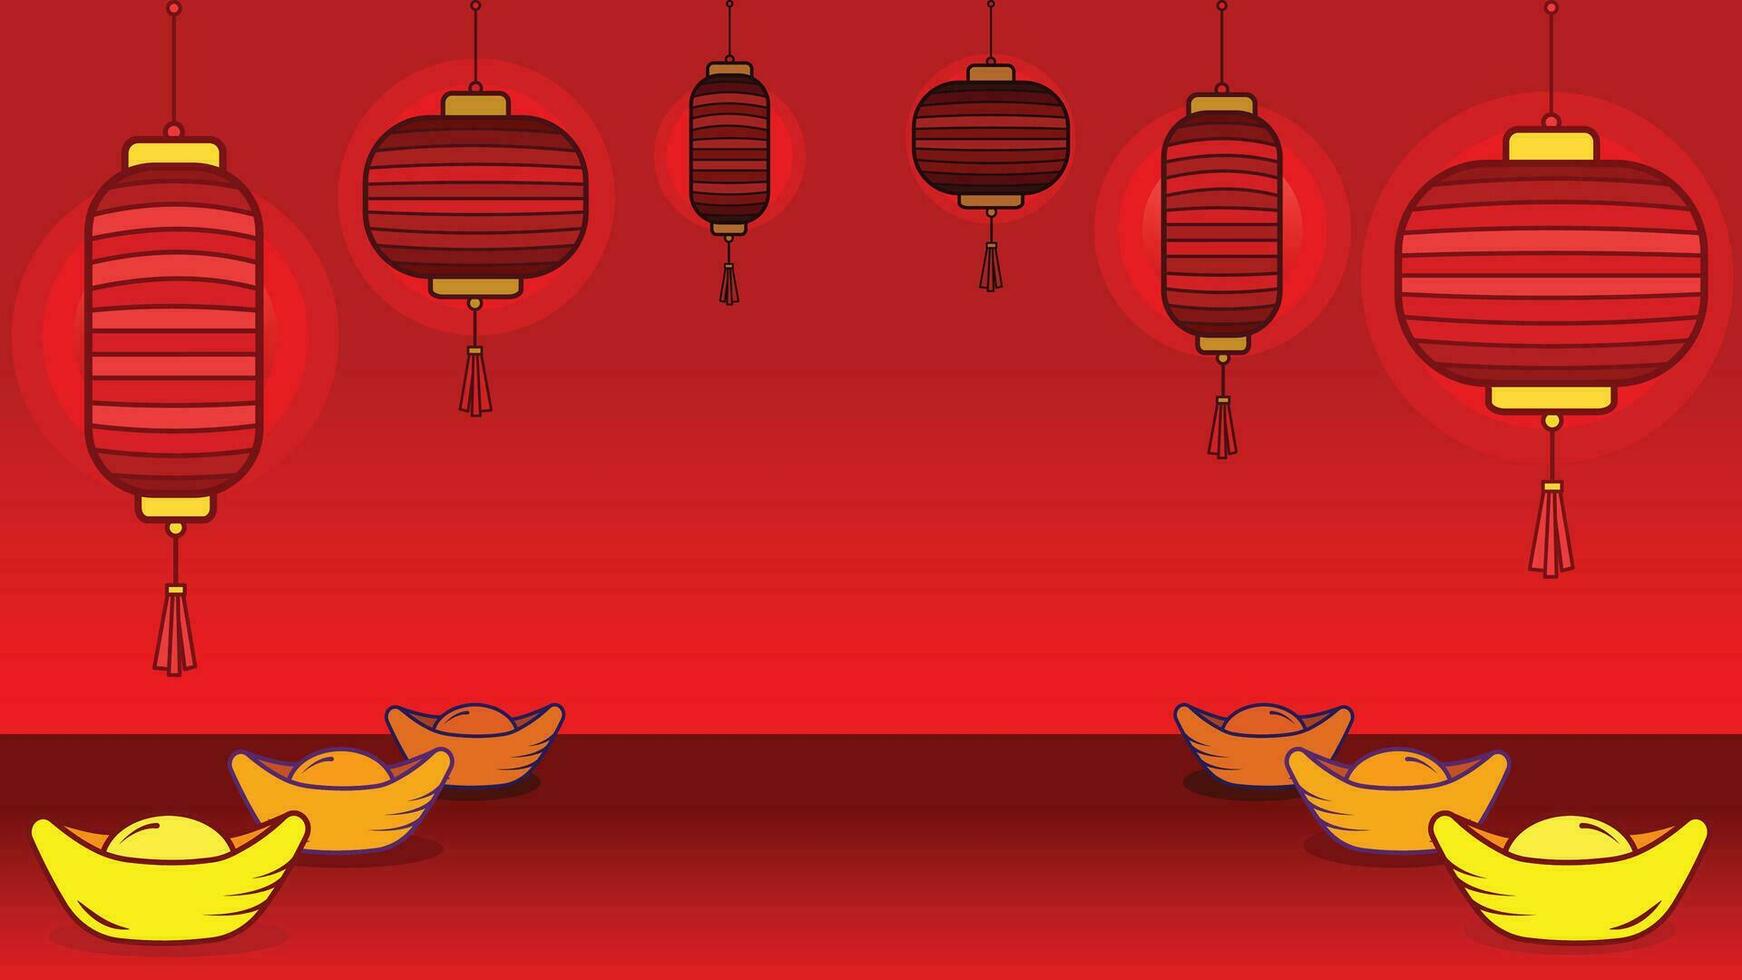 Chinese lunar new year empty copy space background with no text. Lanterns and sycee gold ingot decorative vector illustration for website wallpaper, social media backdrop, prints, and other purposes